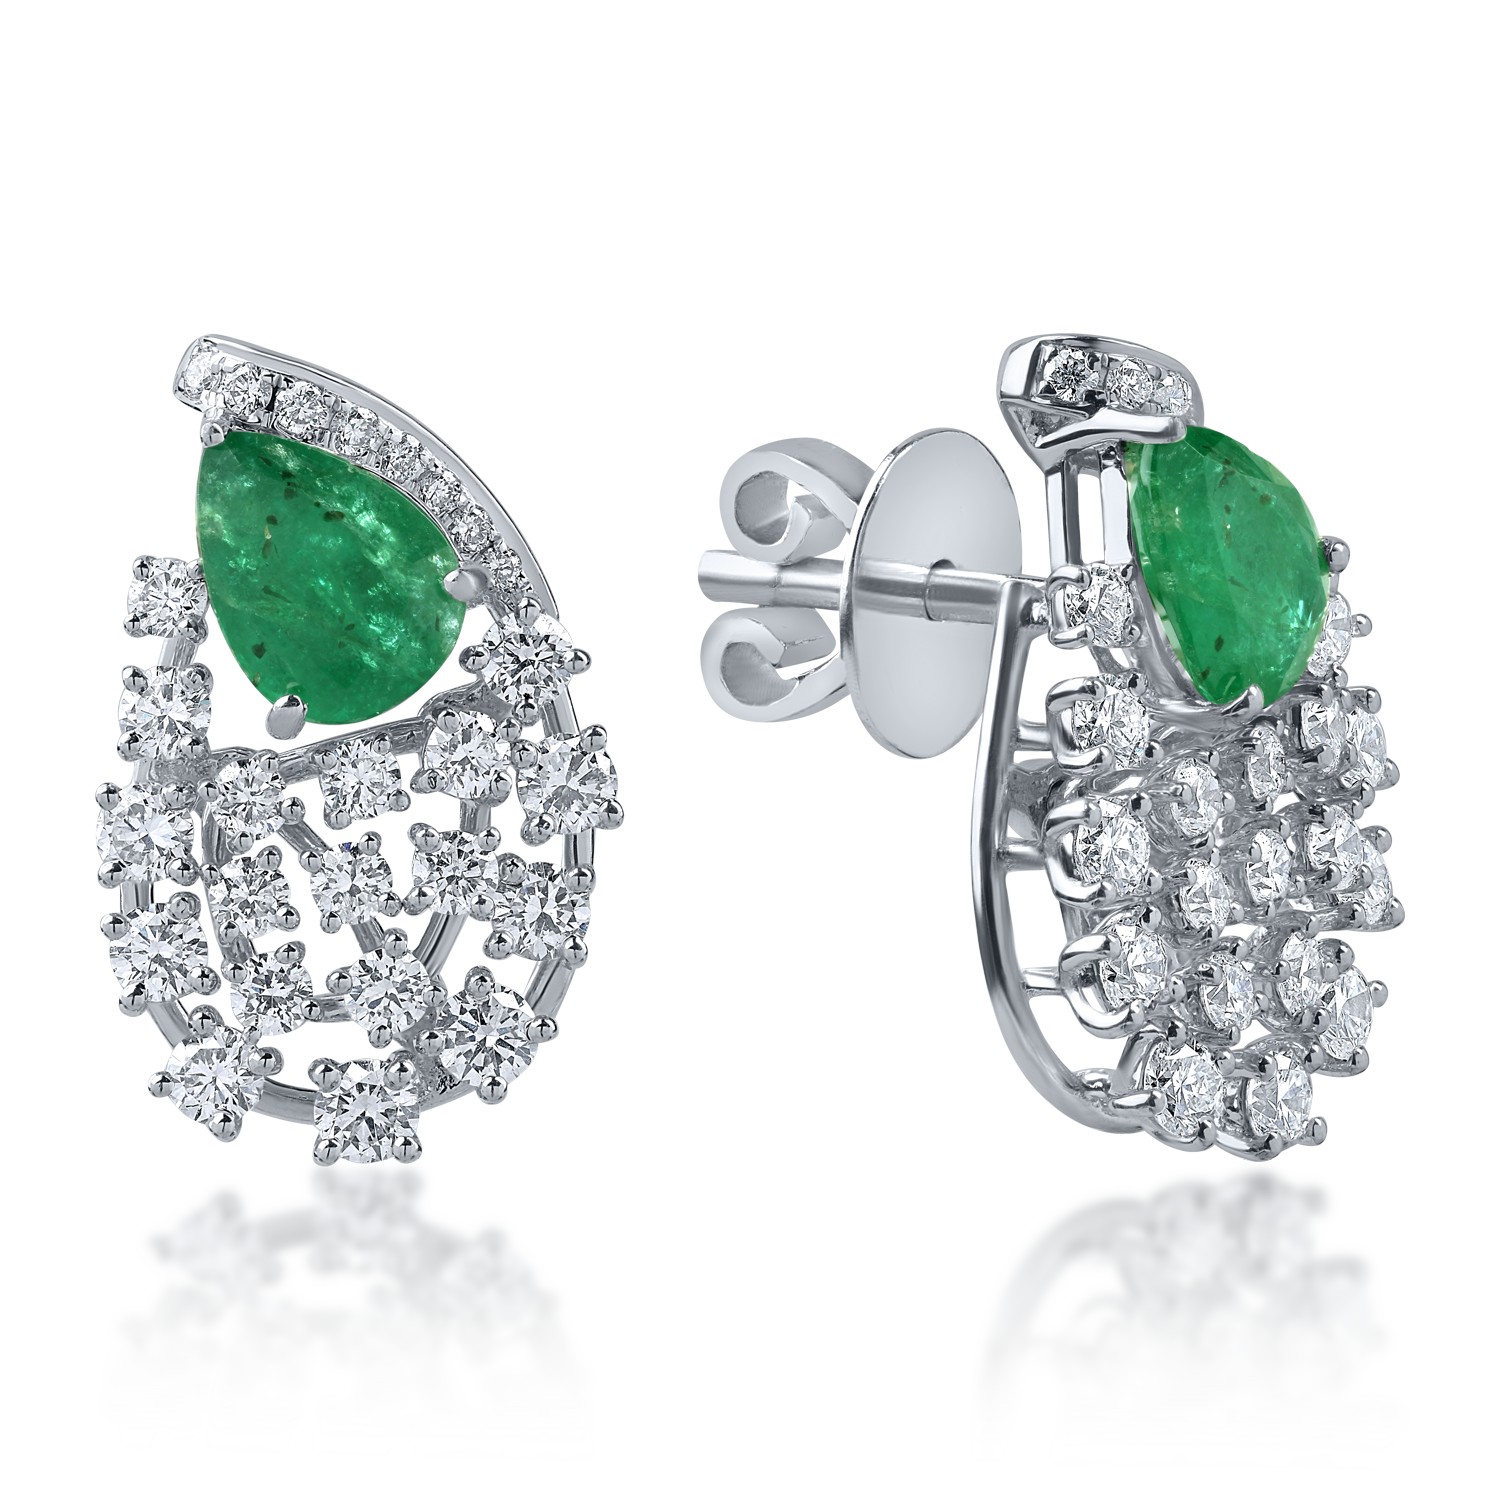 White gold on-ear earrings with 1.58ct emeralds and 1.54ct diamonds